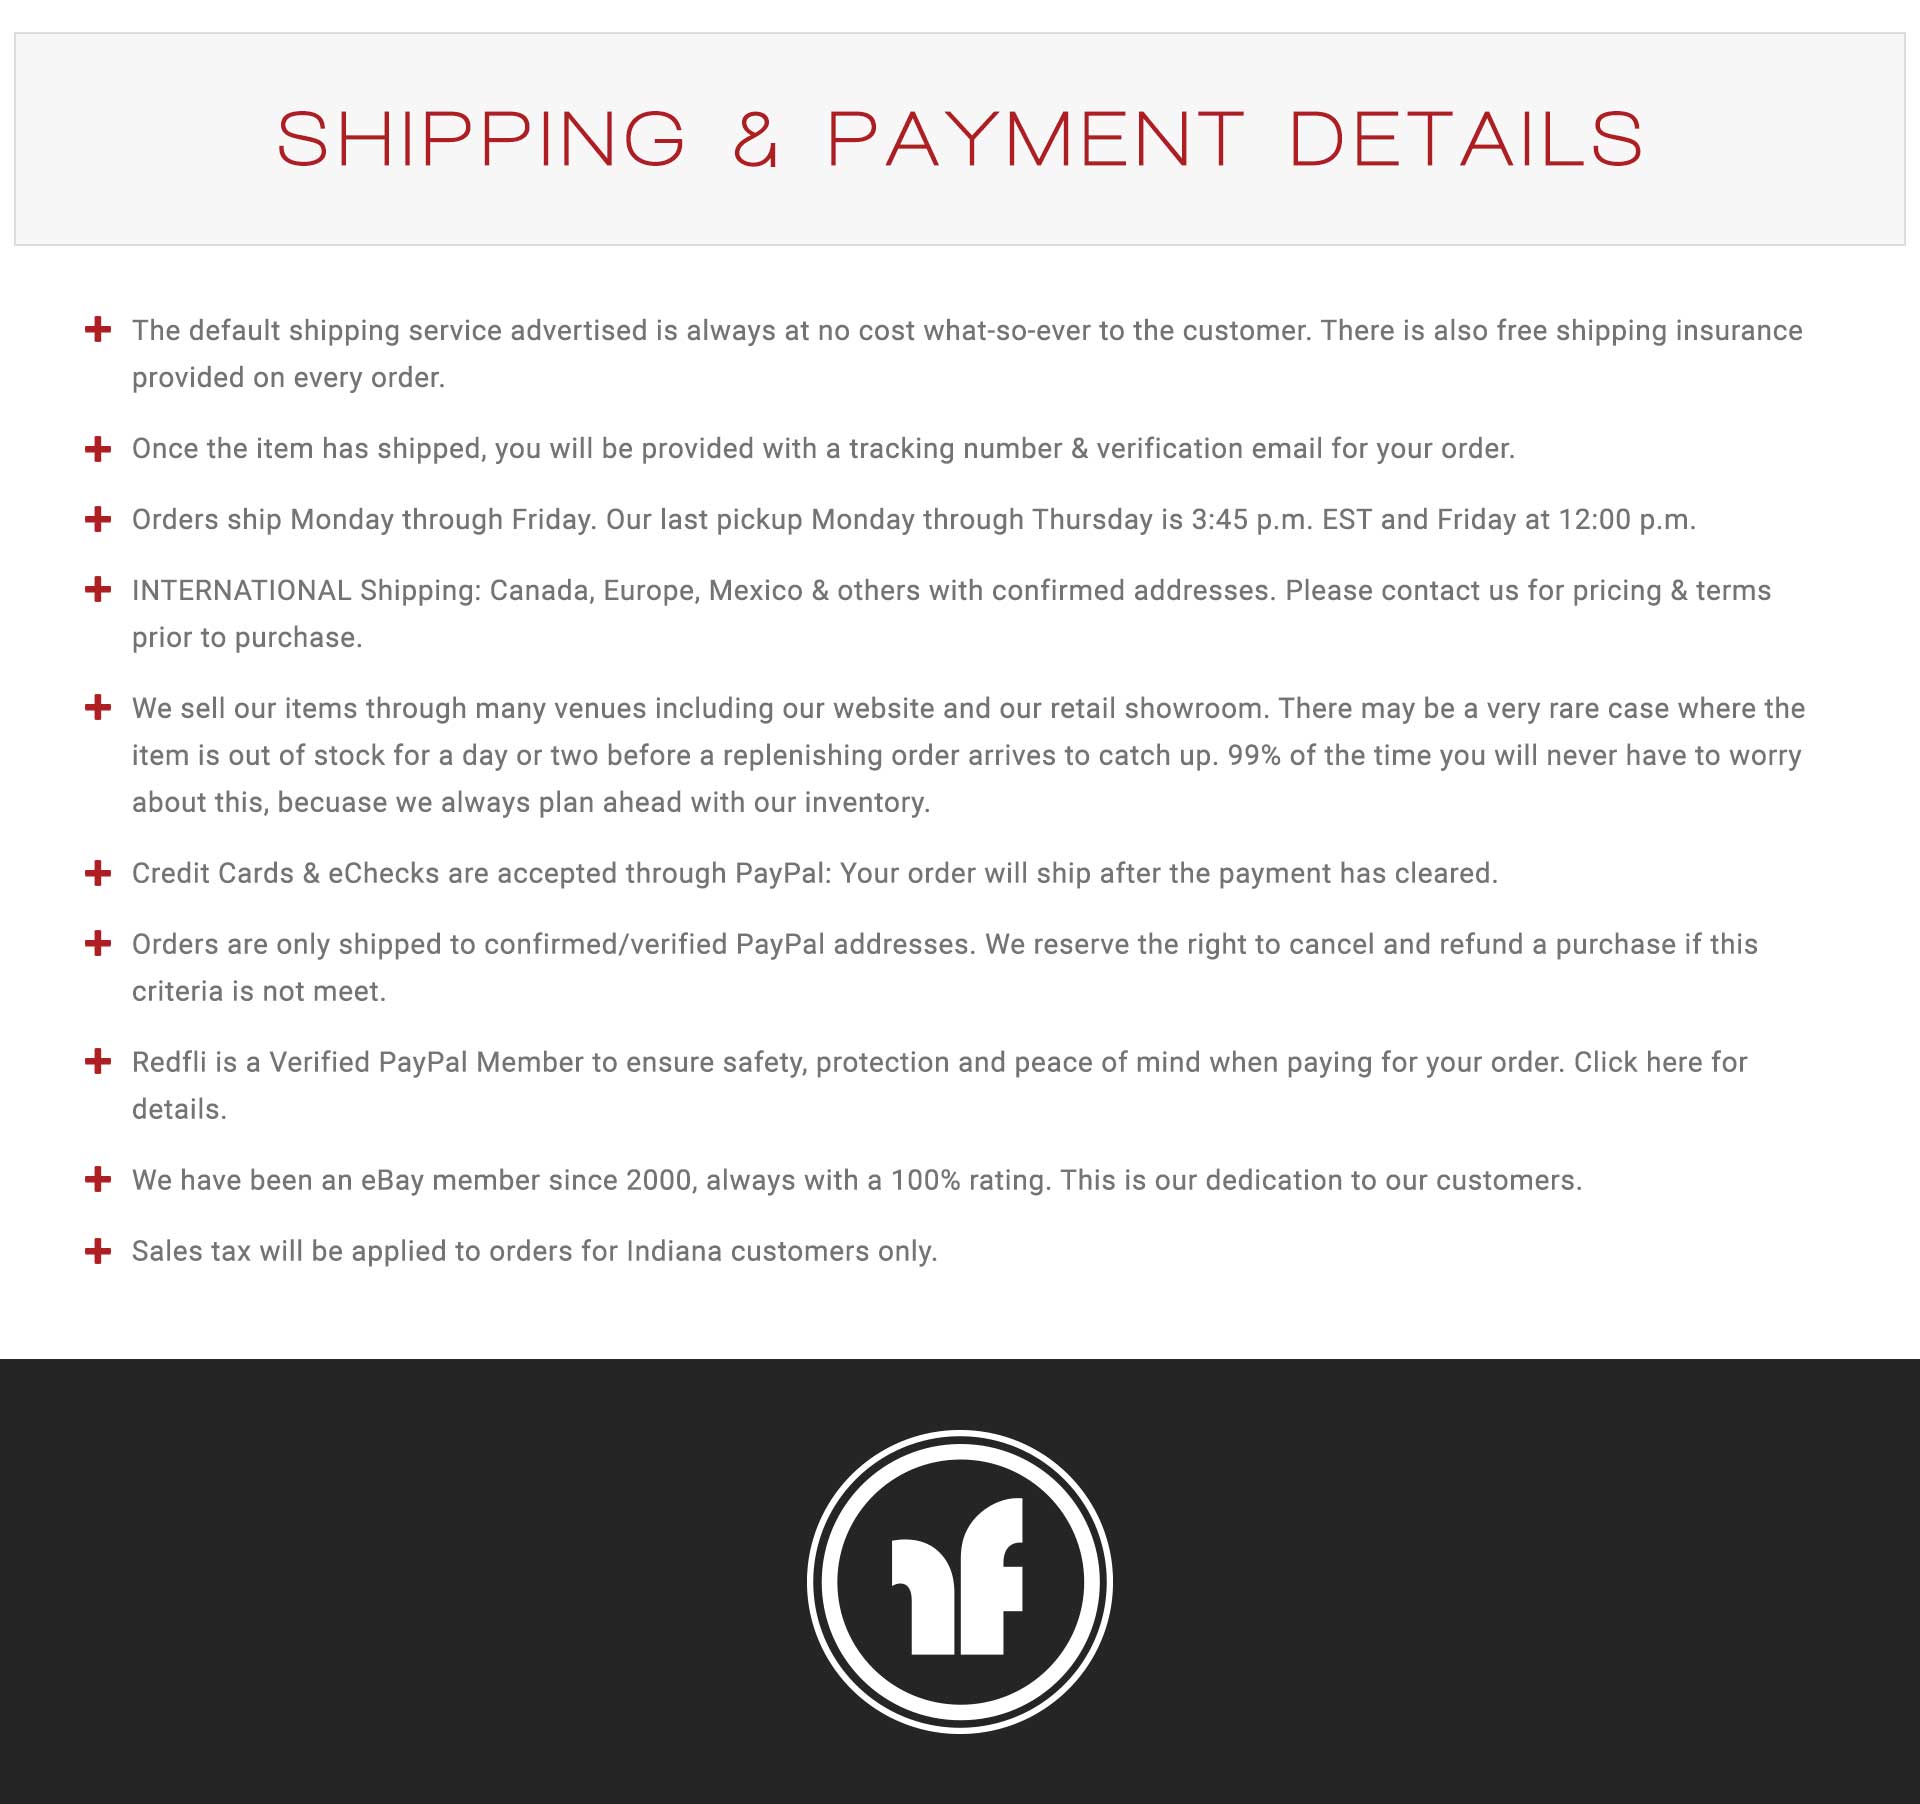 Shipping & Payment Image